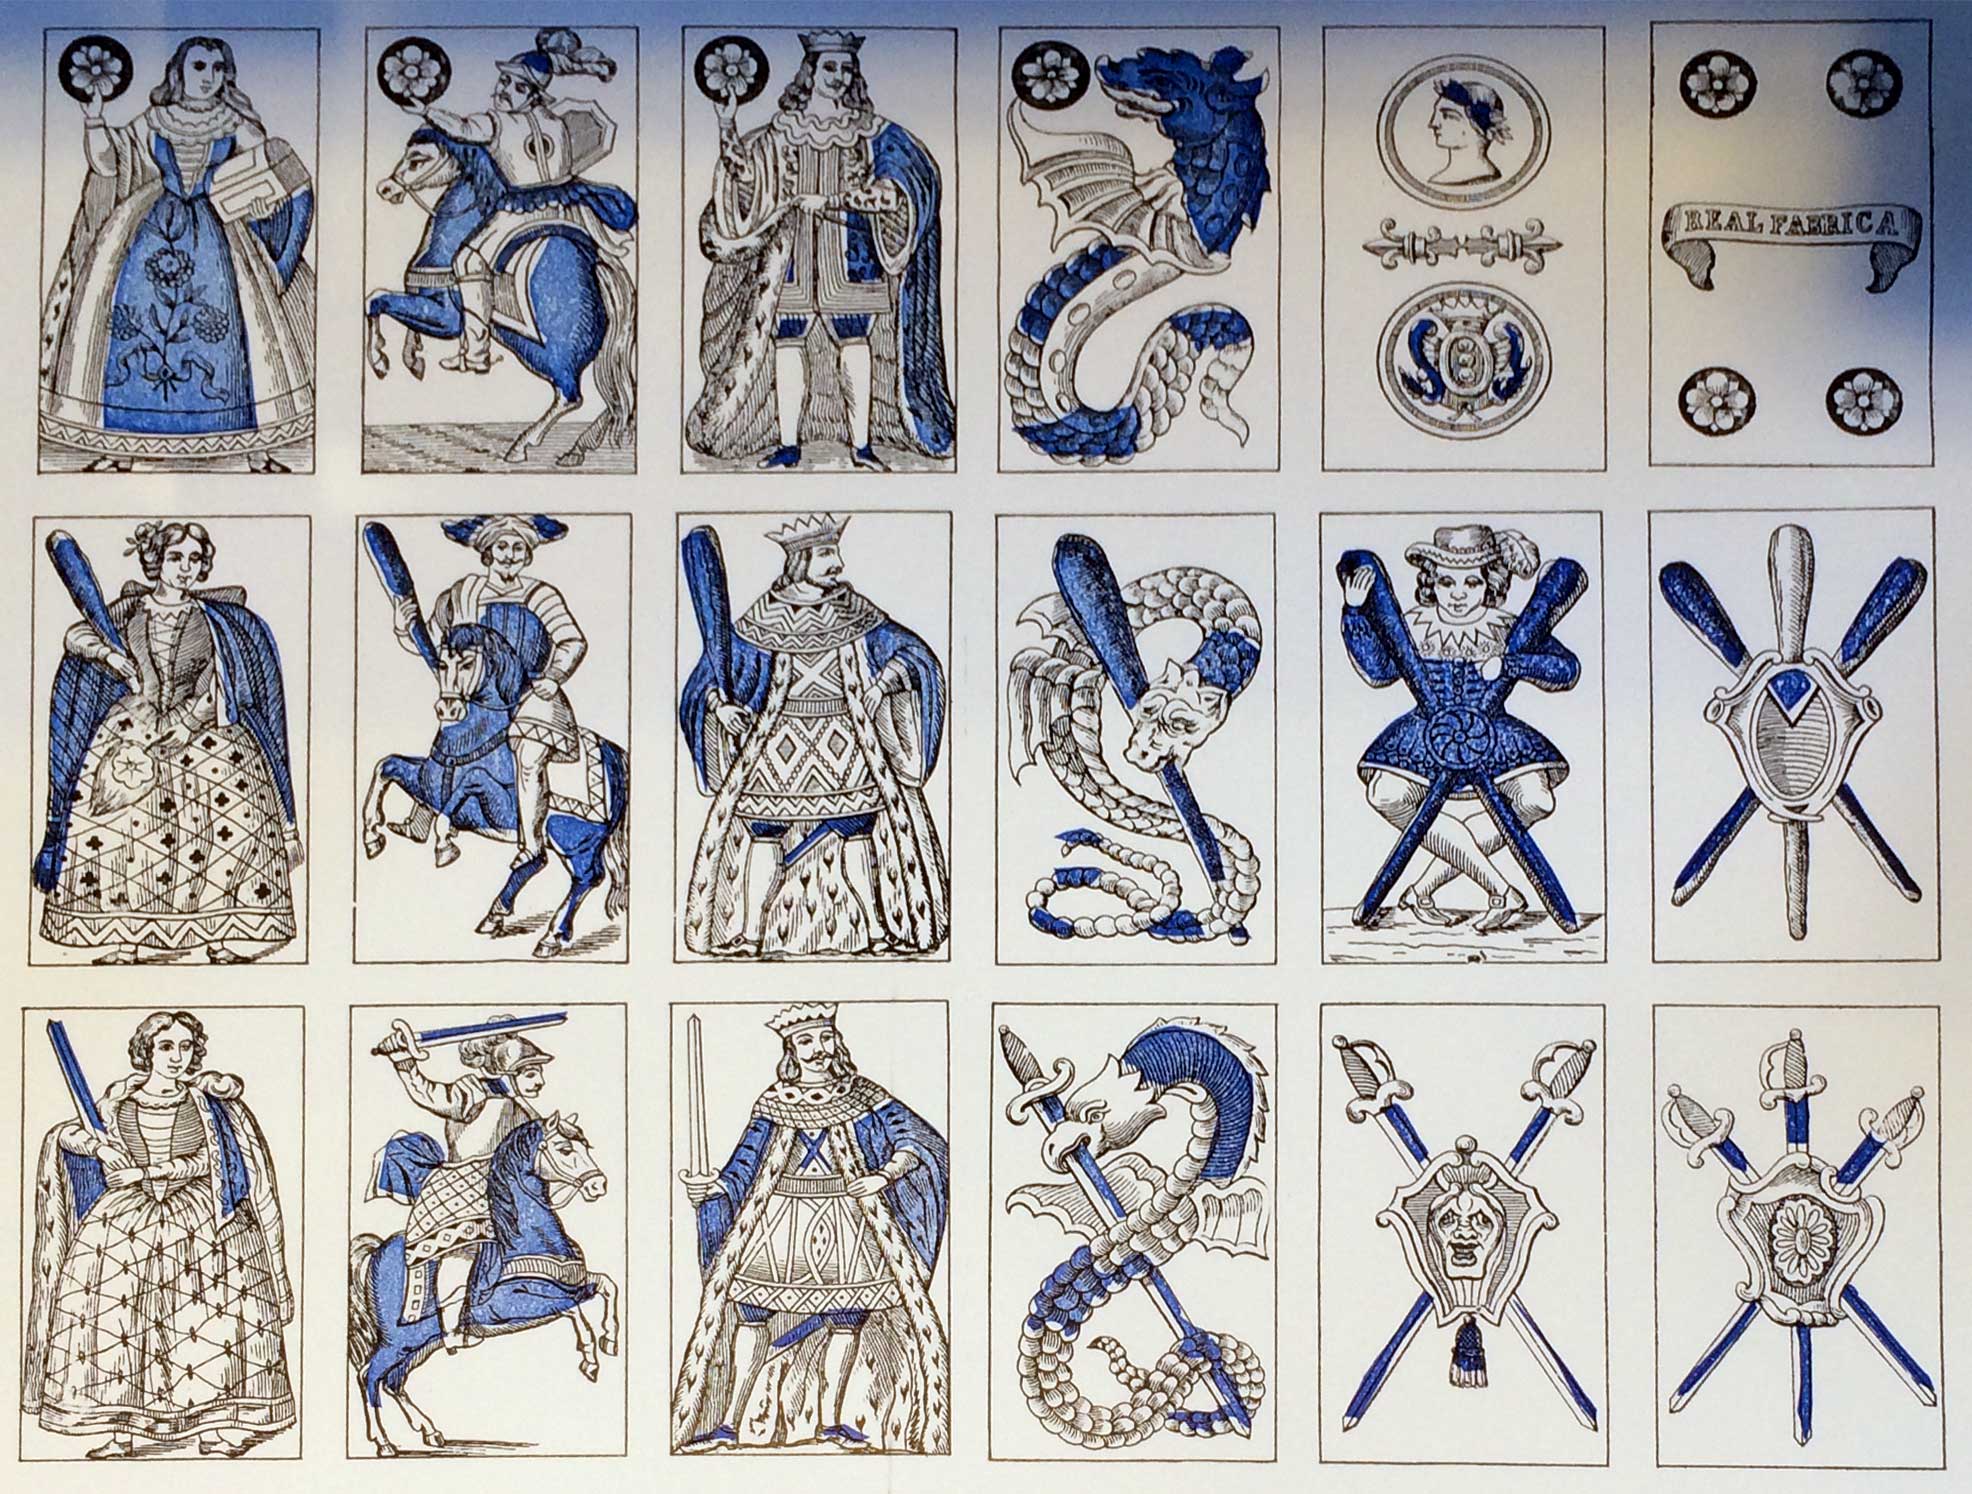 modern reprint of the obsolete Portuguese pattern, National Playing Card Museum, Turnhout